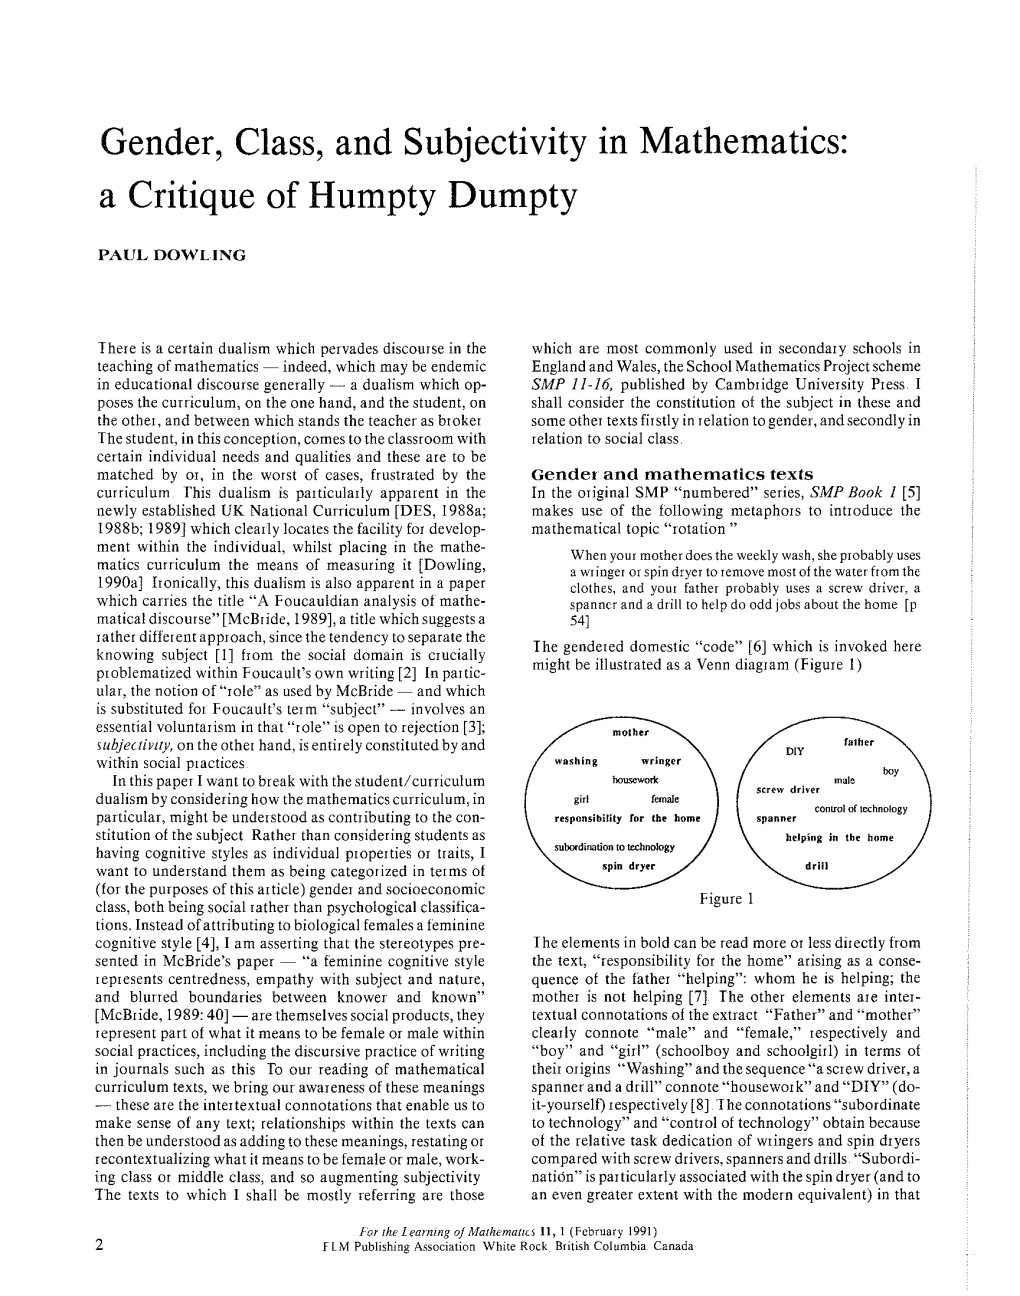 Gender, Class, and Subjectivity in Mathematics: a Critique of Humpty Dumpty